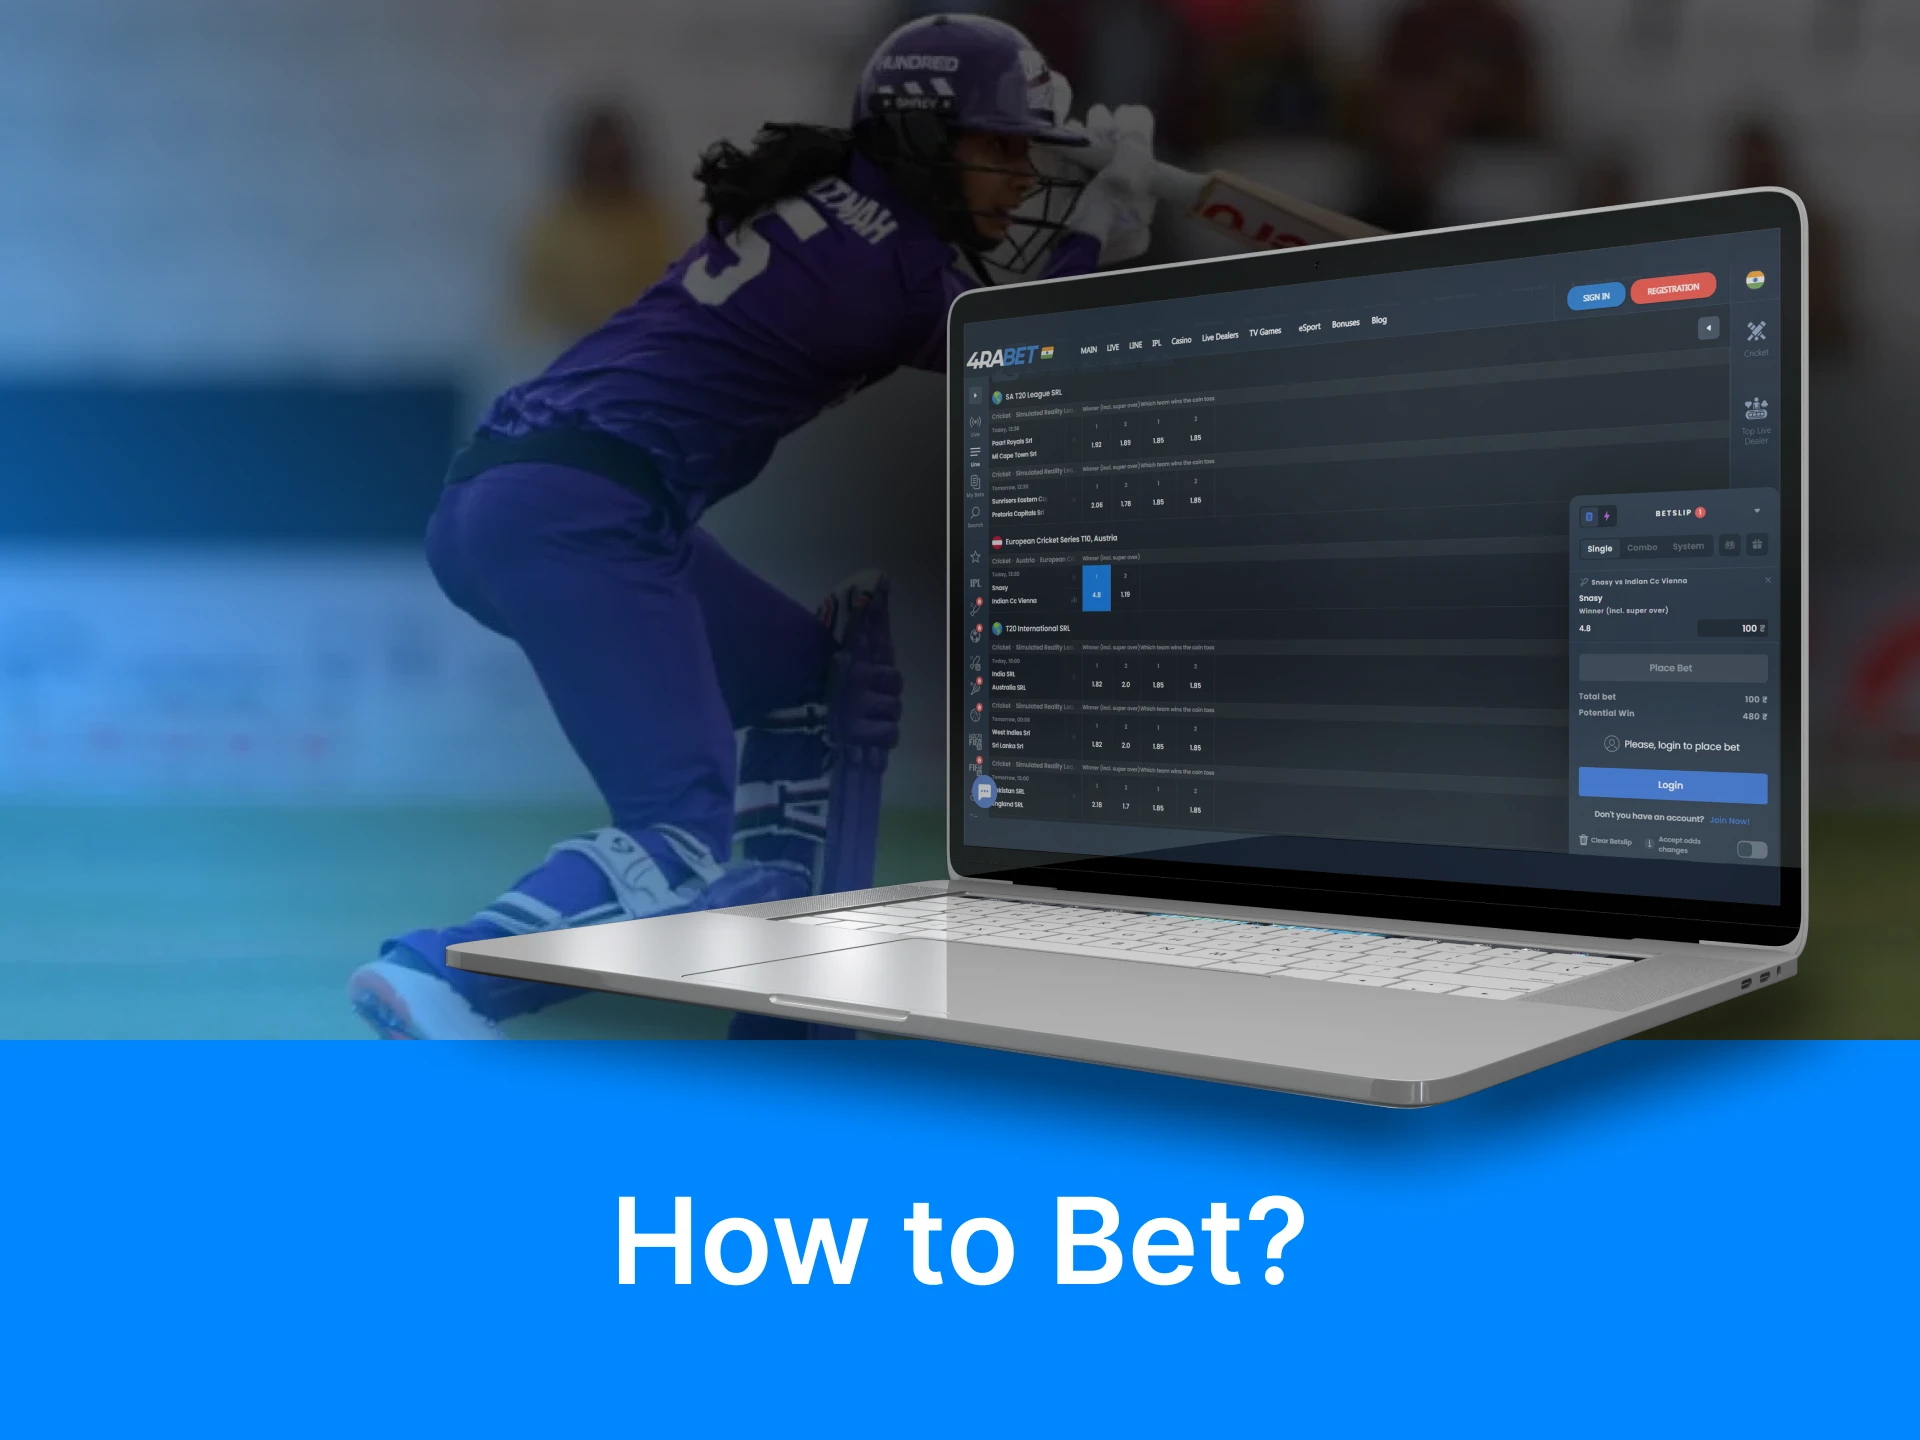 Make your The Hundred bet on special page on the website.